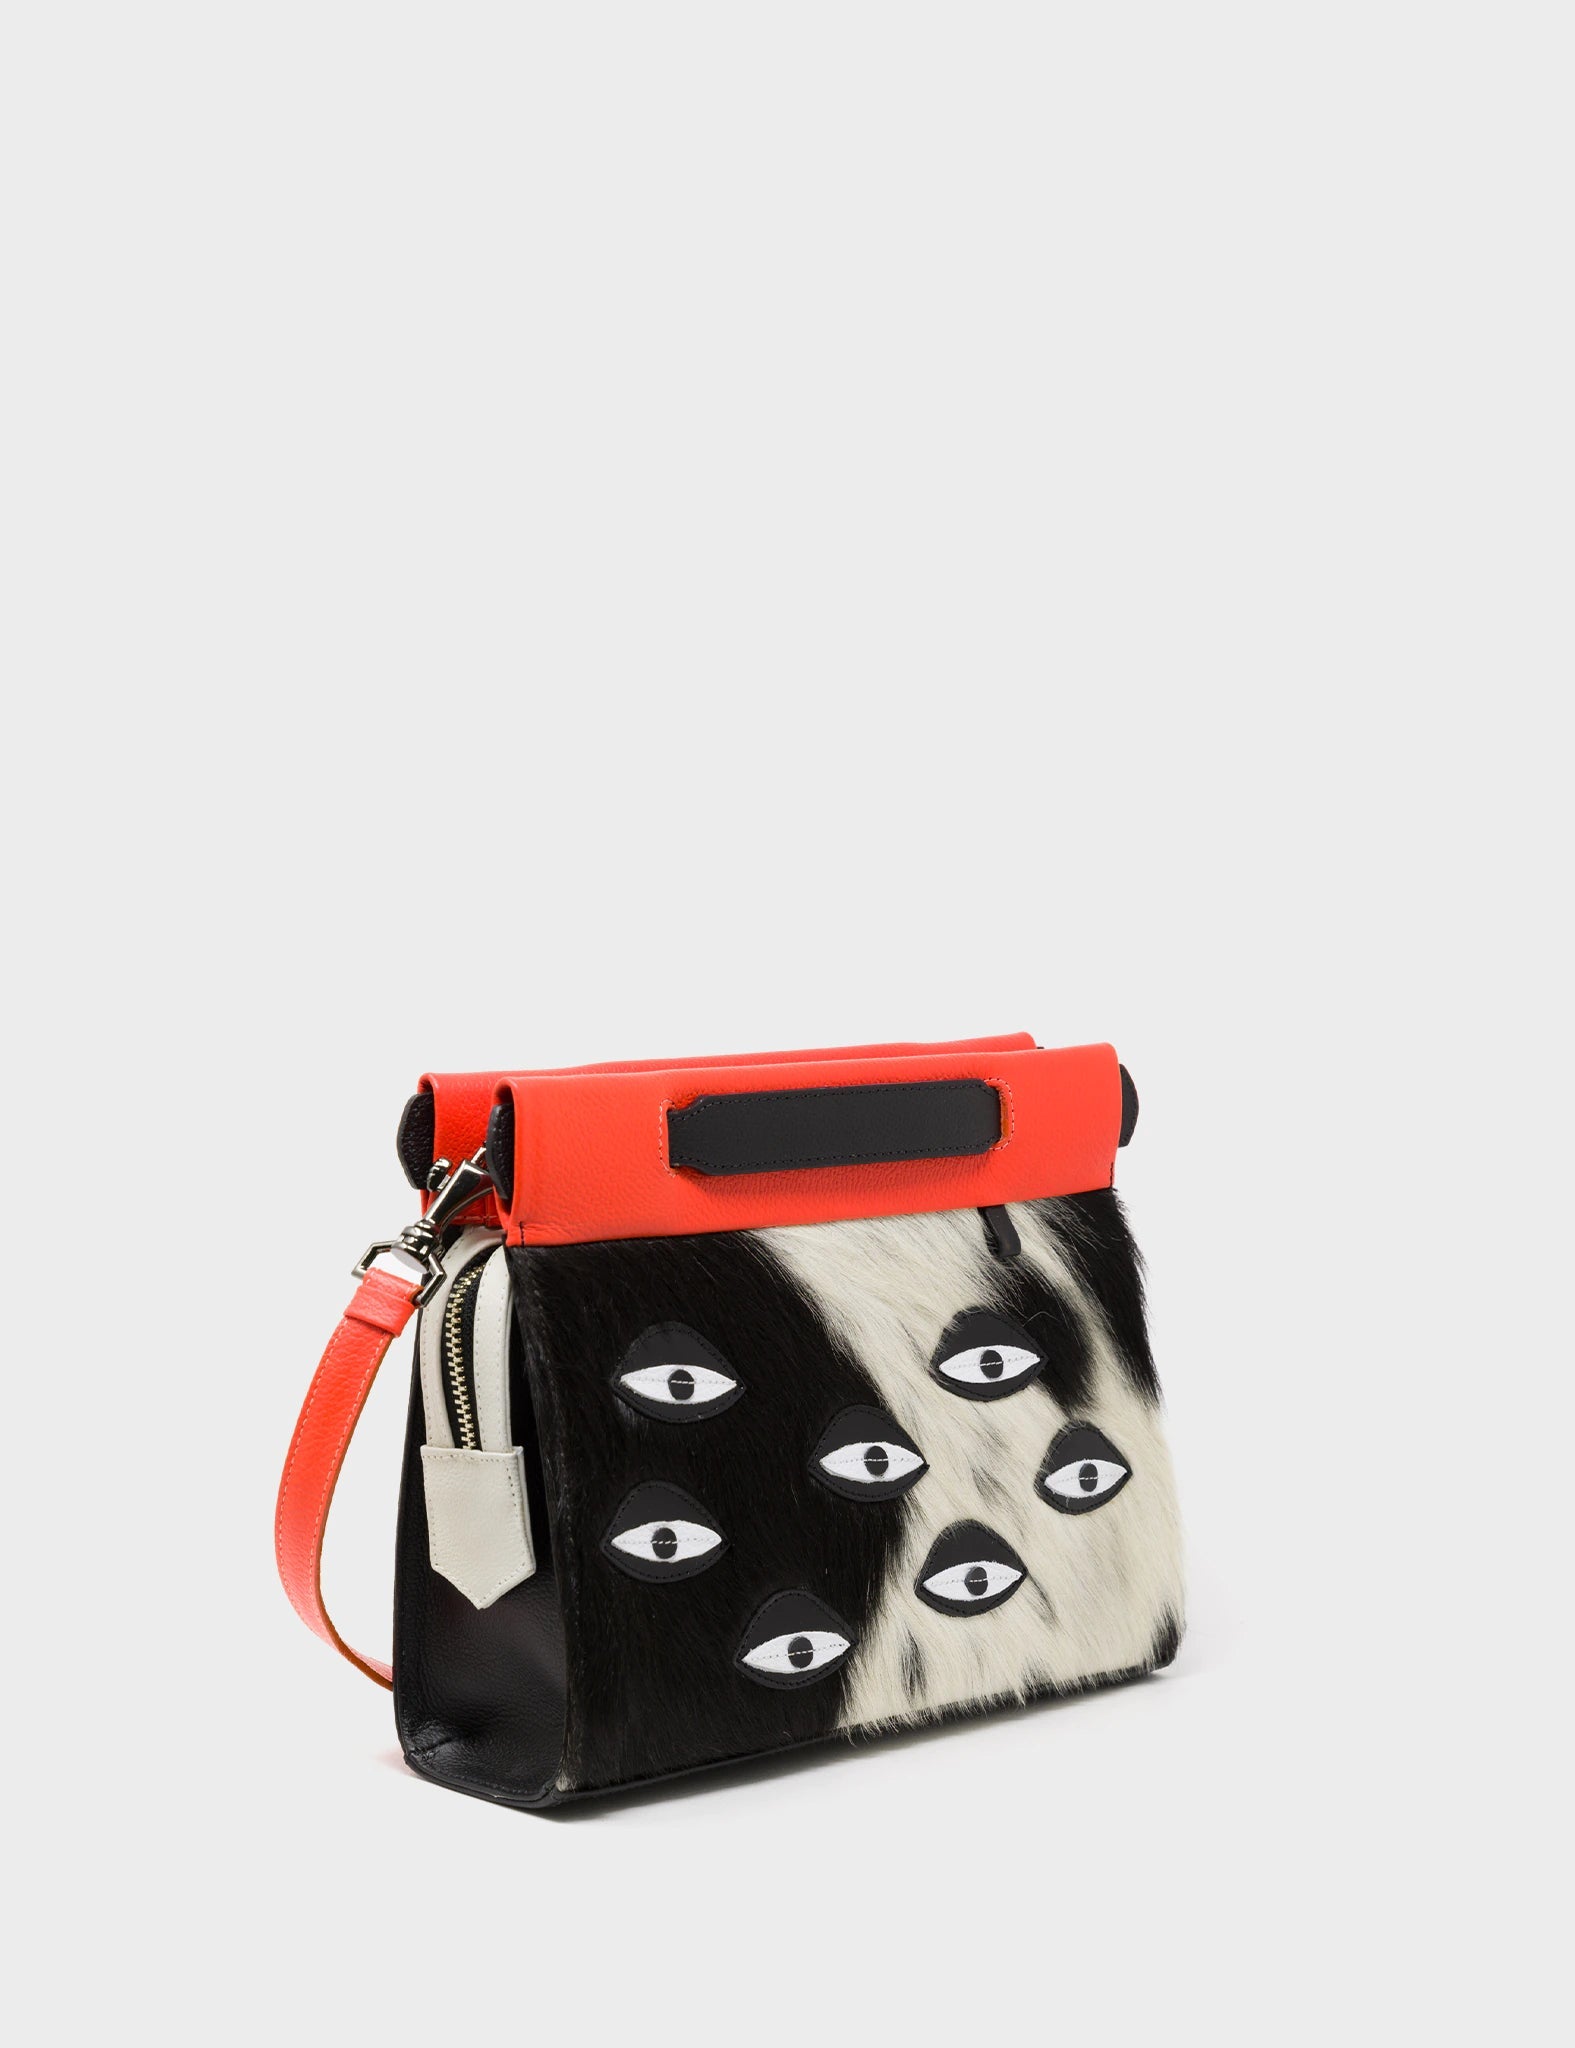 Crossbody Small Black Spotted Fur And Red Leather Bag - Eyes Applique Adjustable Handle